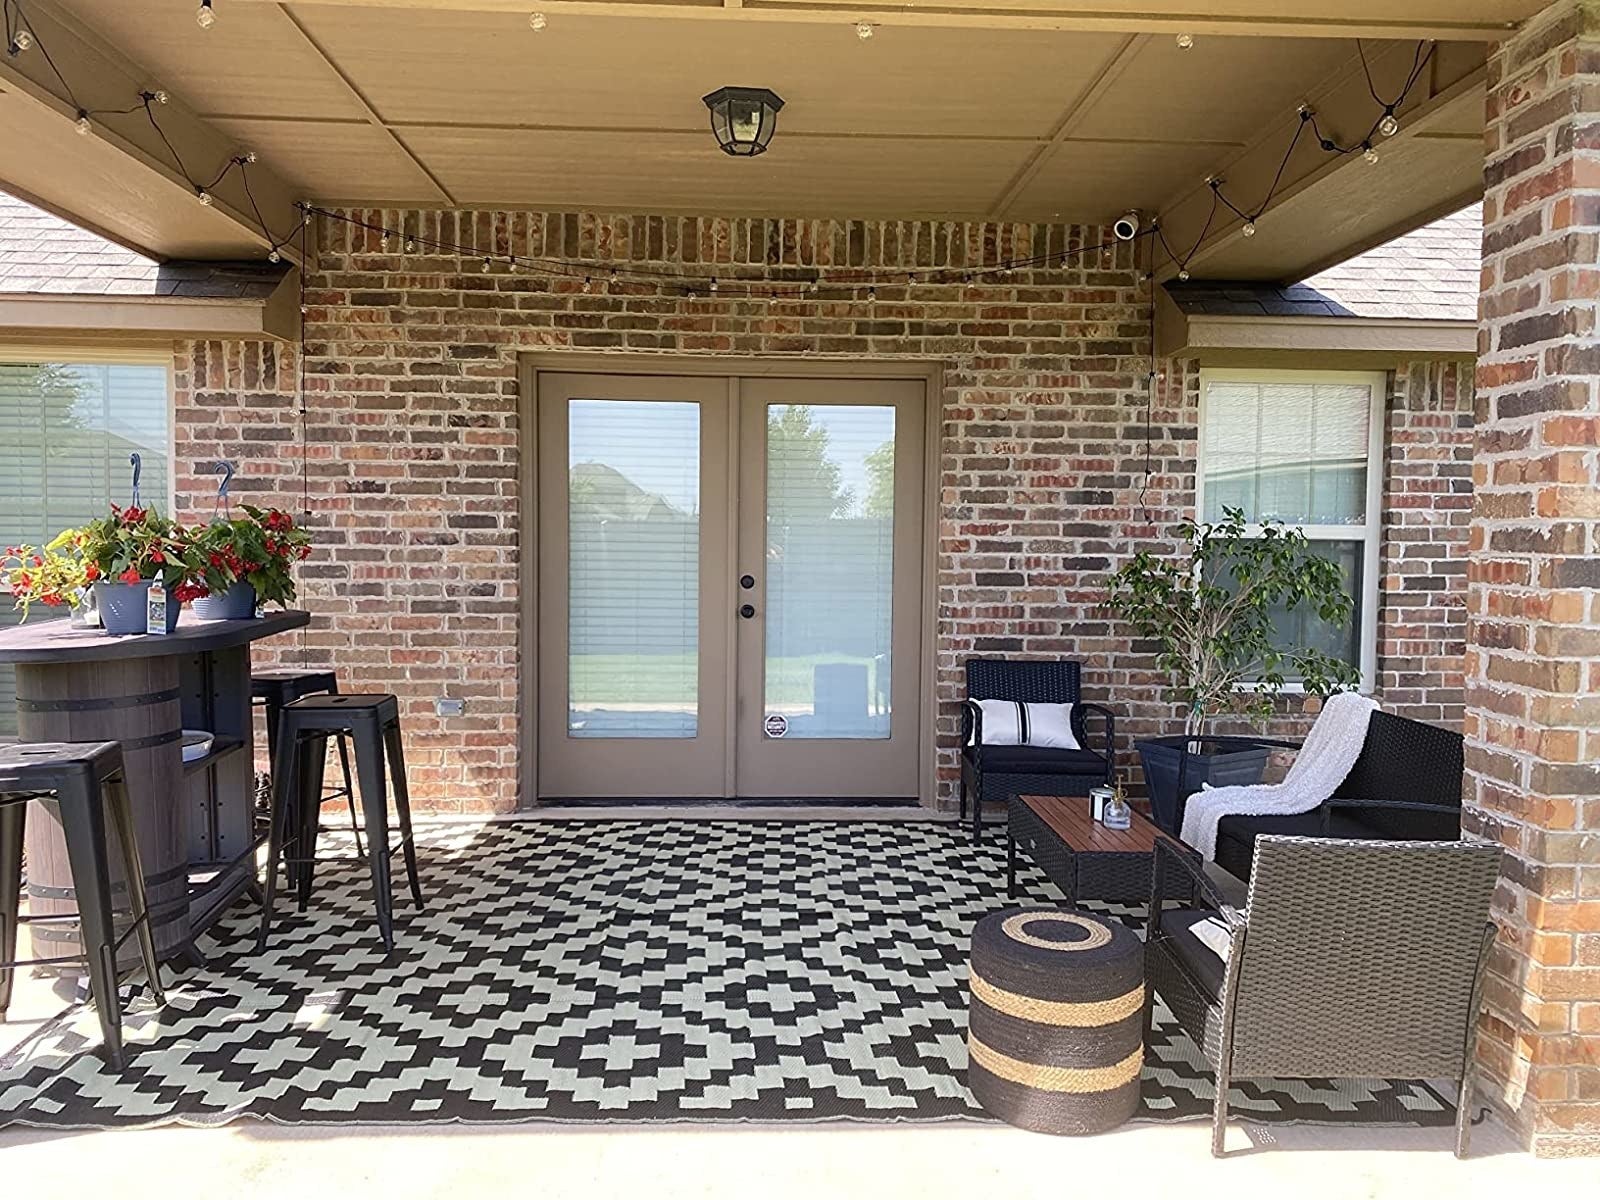 Reviewer image of the rug on their patio with outdoor furniture set up